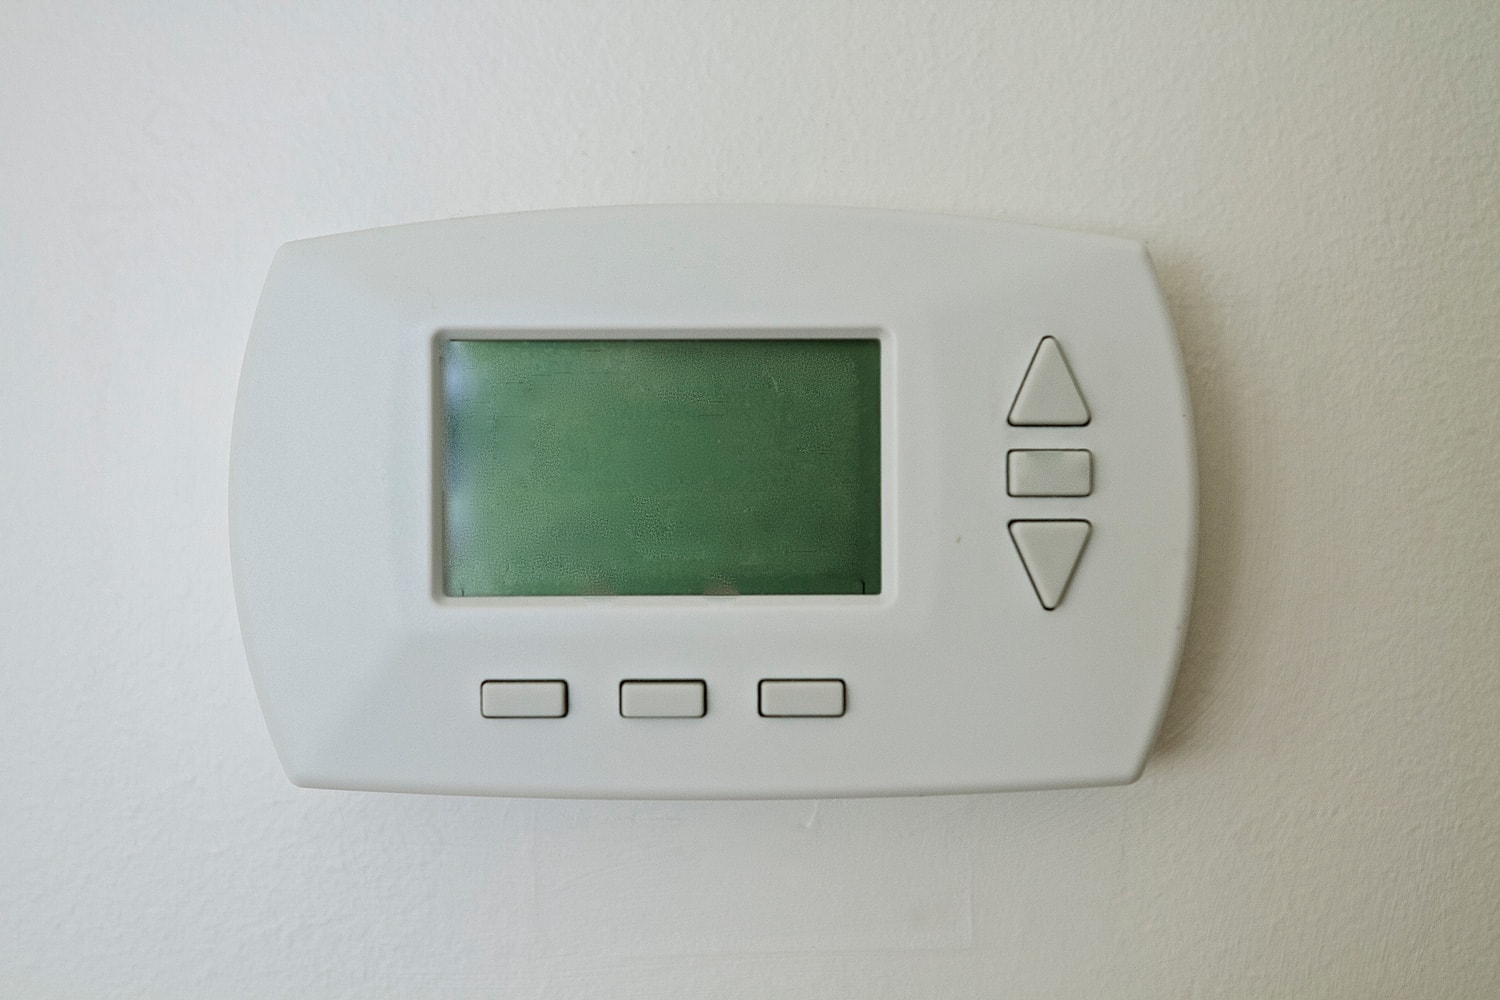 Thermostat with a blank screen for text